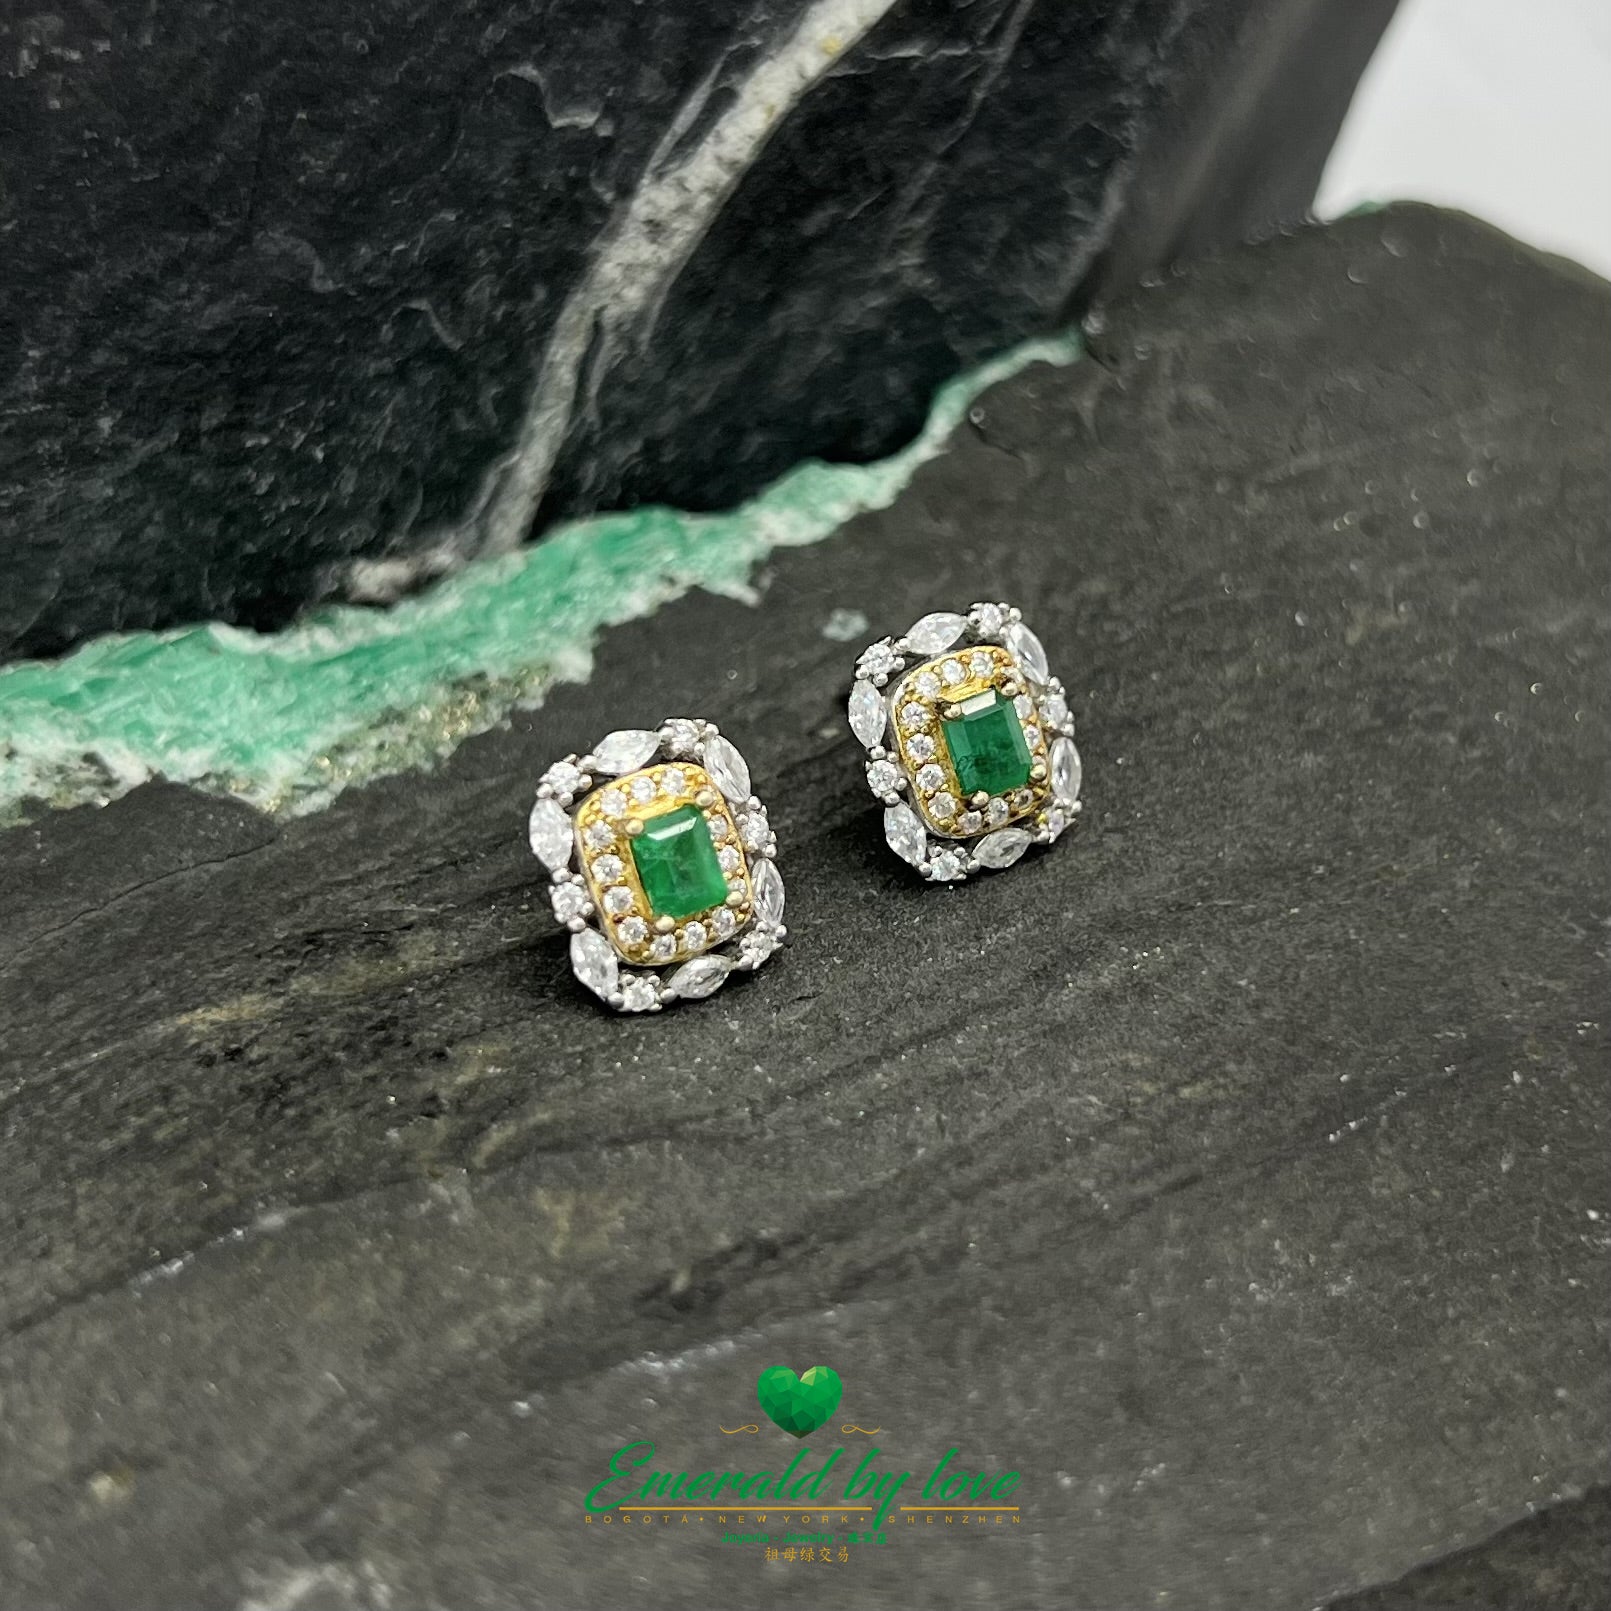 Rectangular Sterling Silver Earrings with Gold Plating and Central Baguette Emerald